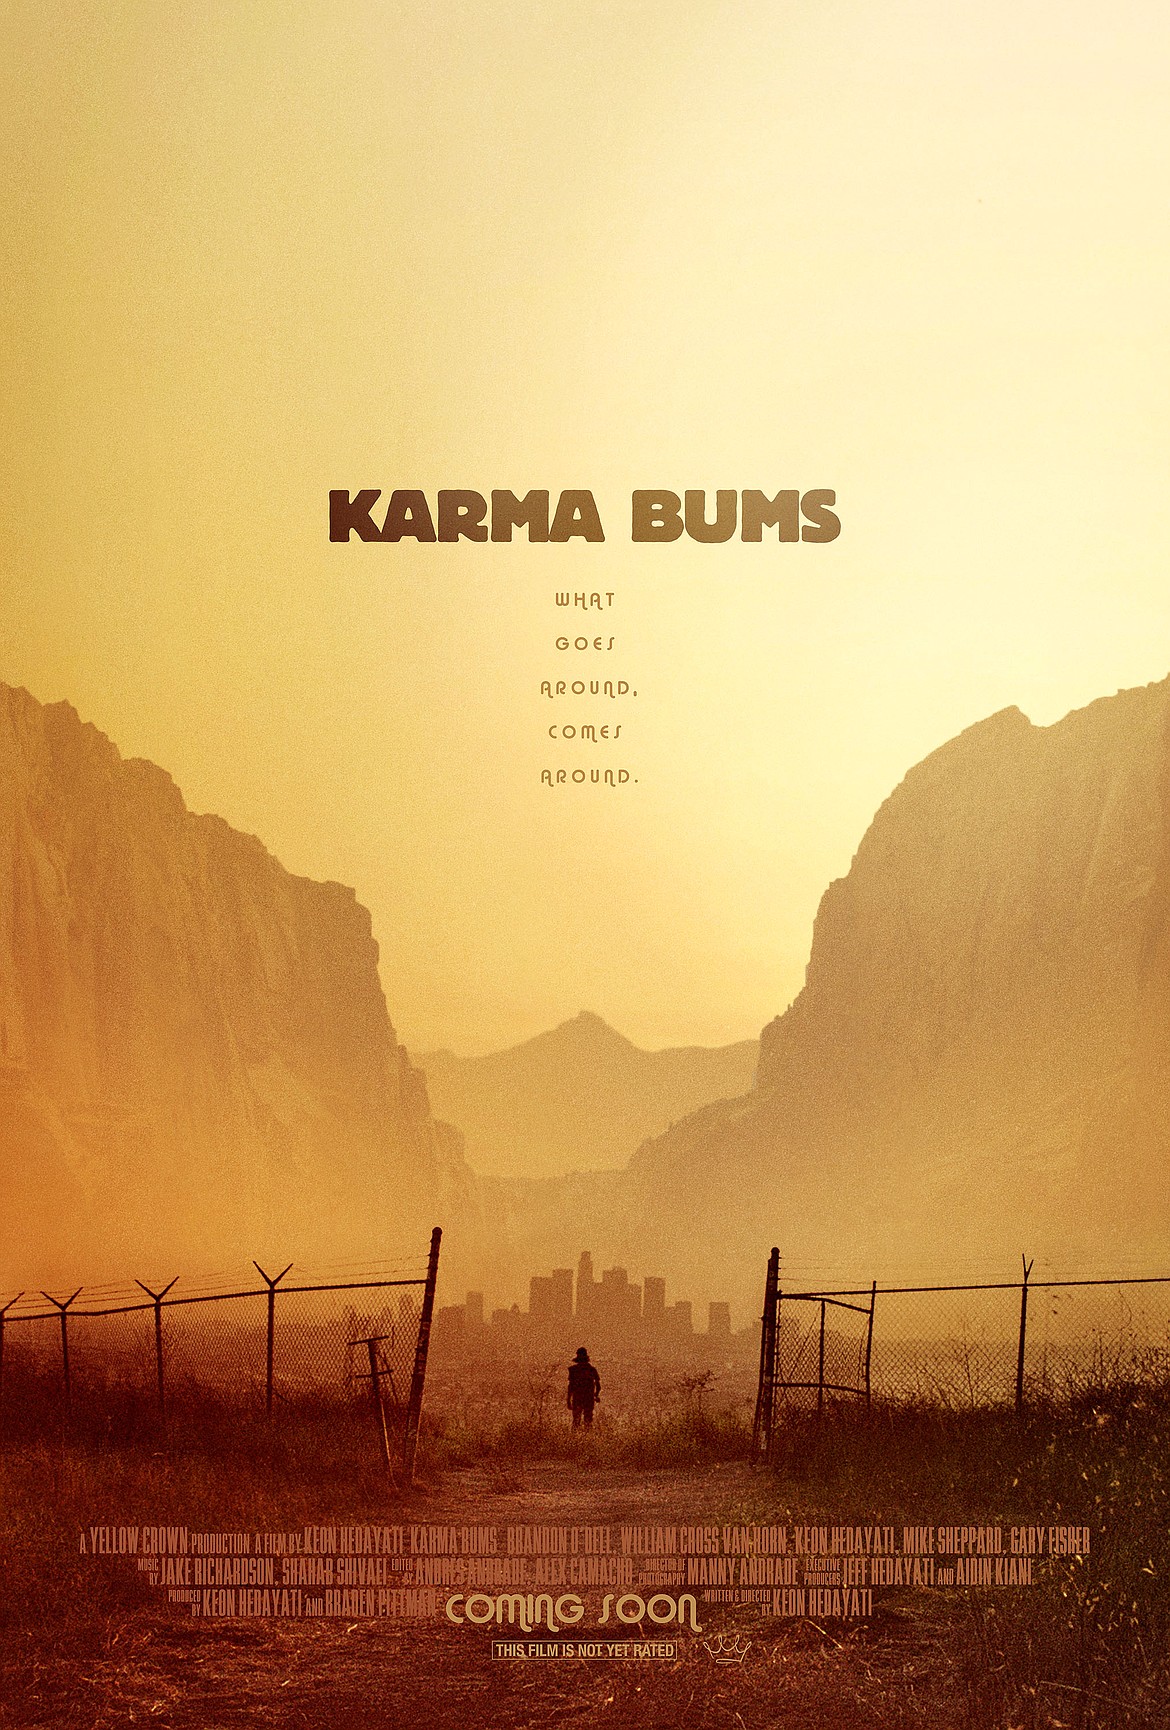 The poster for the new independent movie, "Karma Bums".